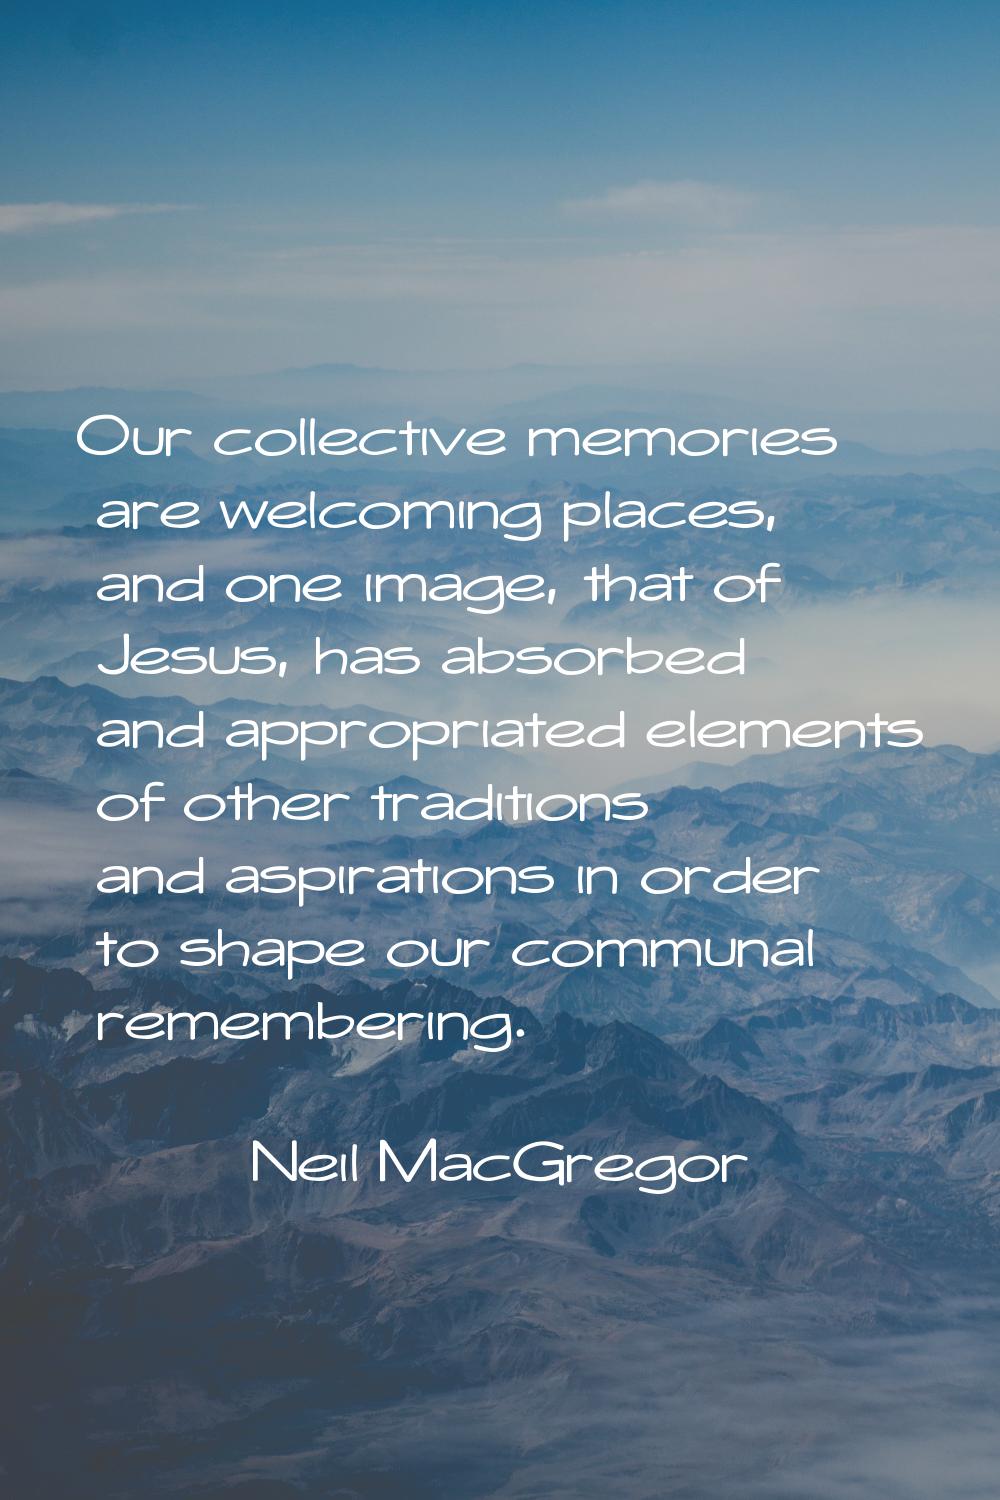 Our collective memories are welcoming places, and one image, that of Jesus, has absorbed and approp